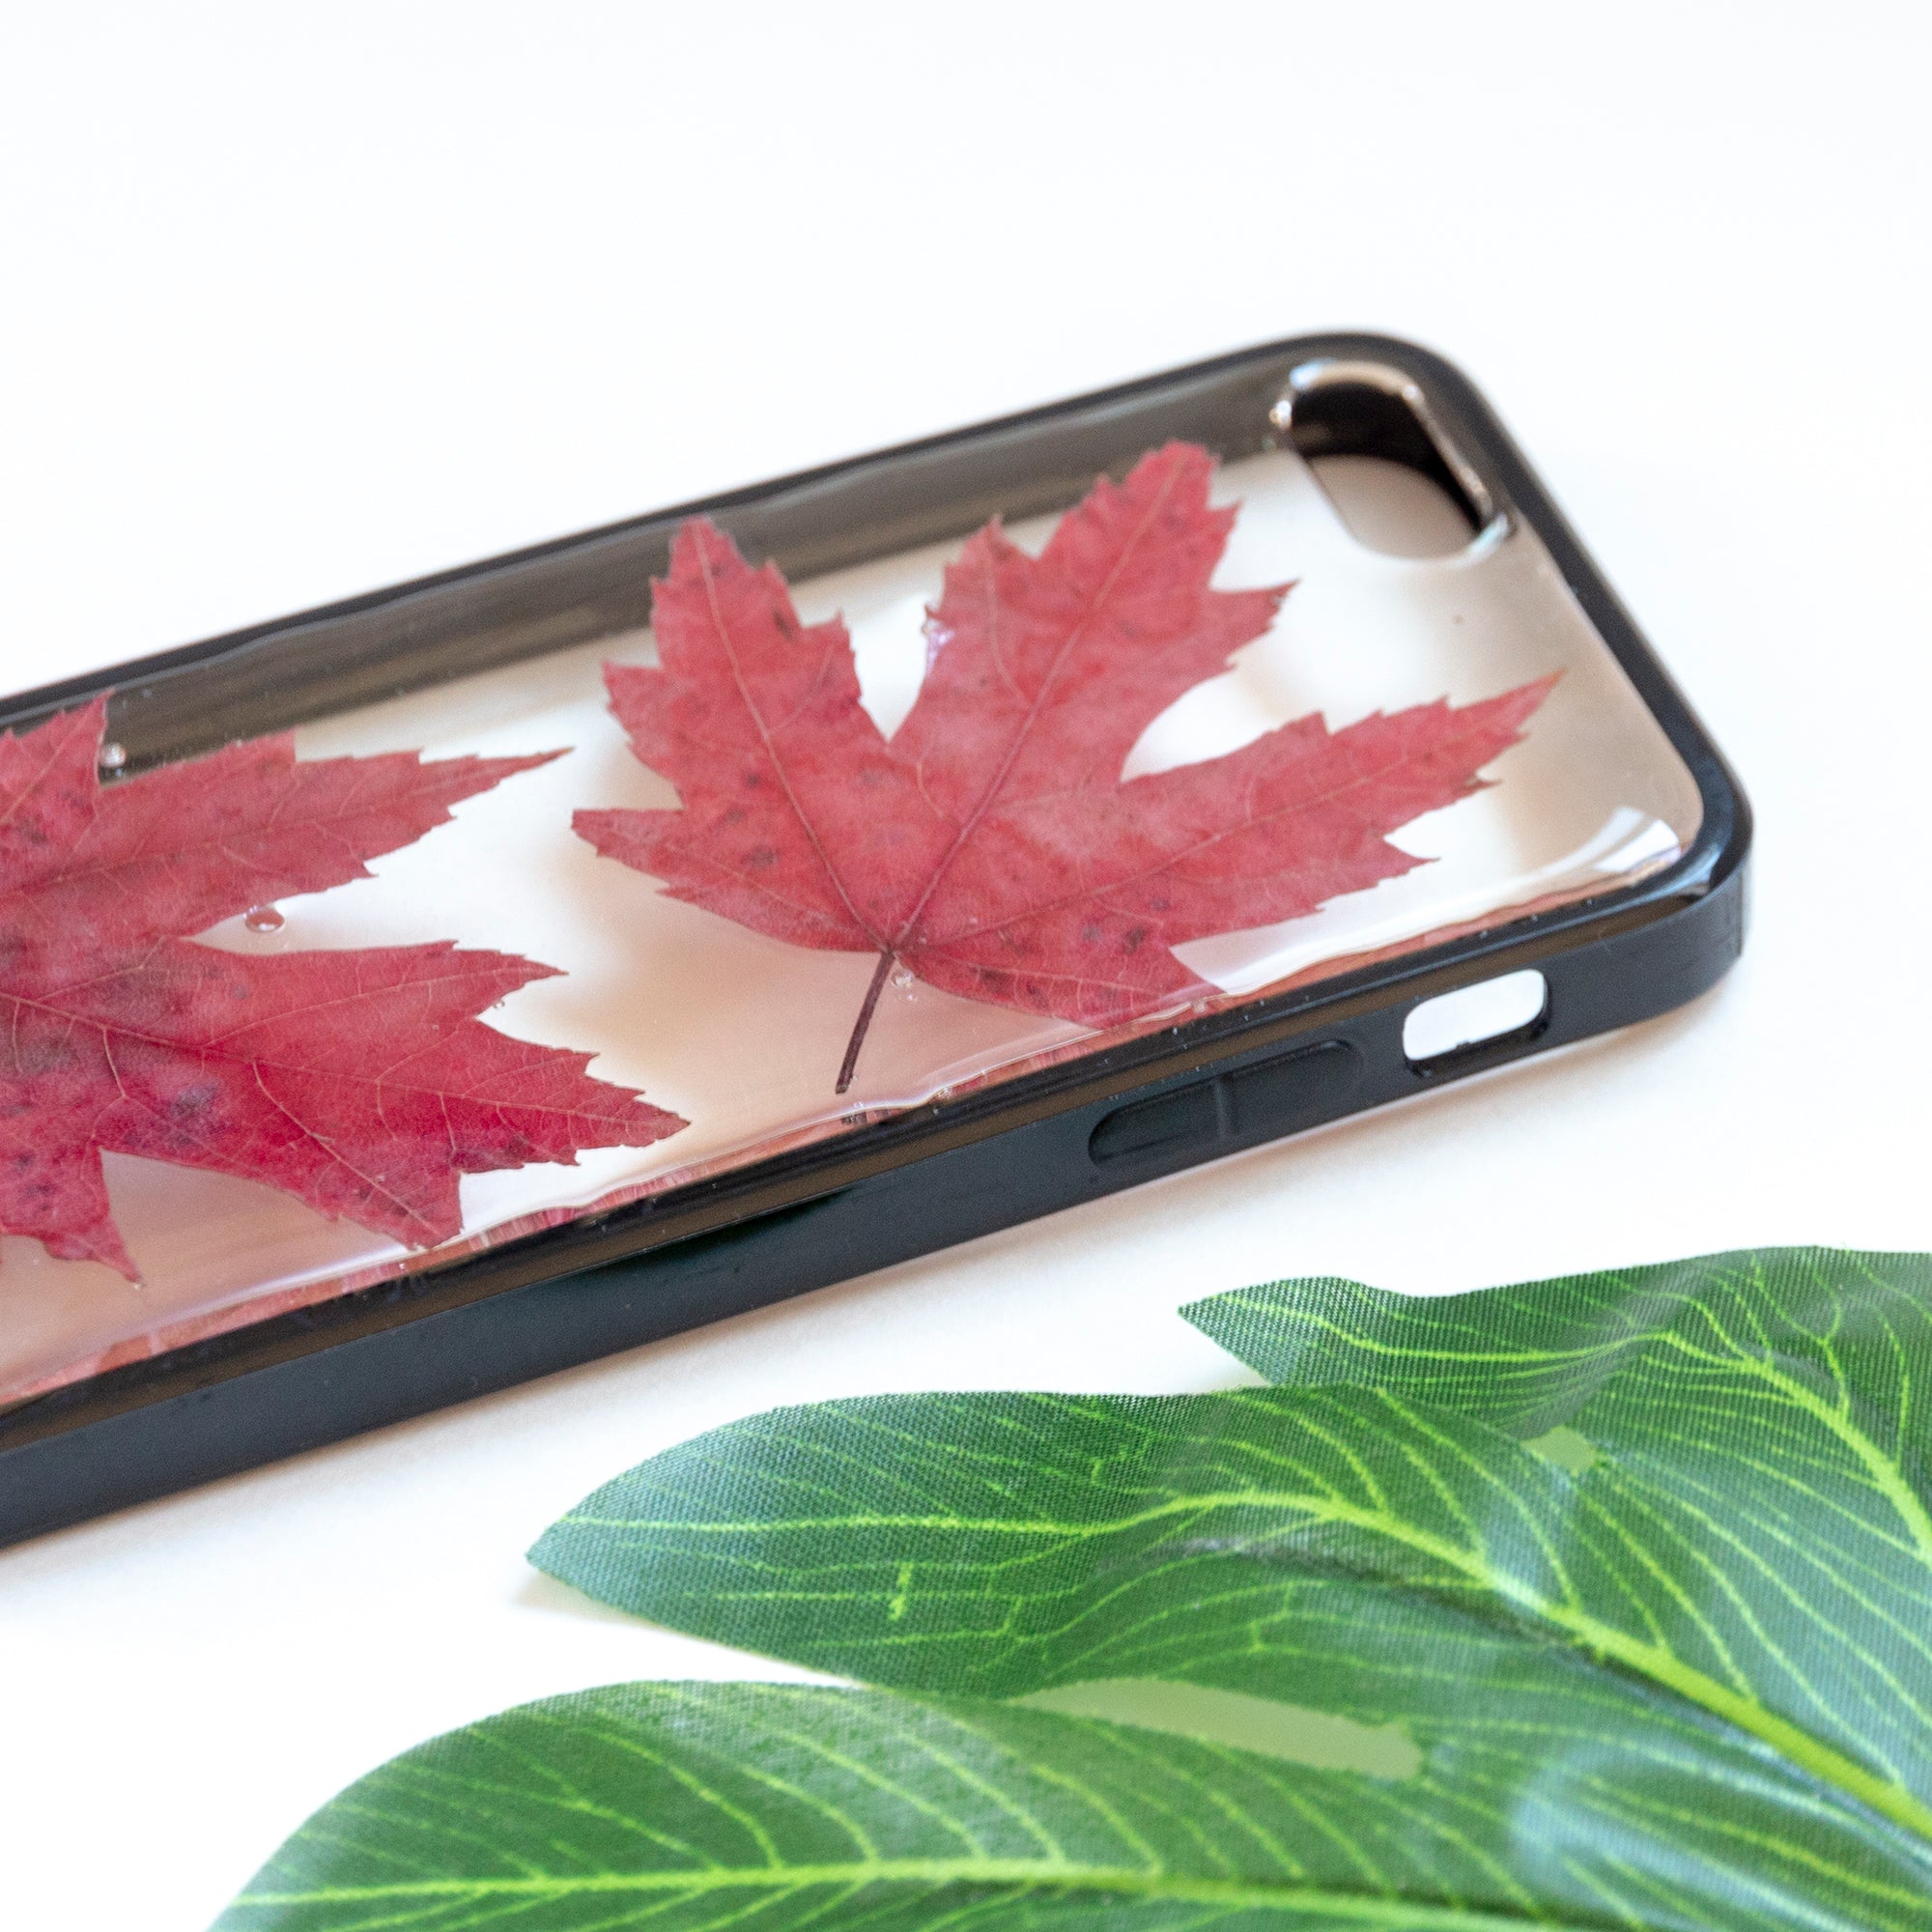 Floral Neverland Floralfy Fall Leaves Real Pressed Red Canadian Maple Leaf Flower Floral Foliage Botanical iPhone 5 5S SE Bumper Case 04